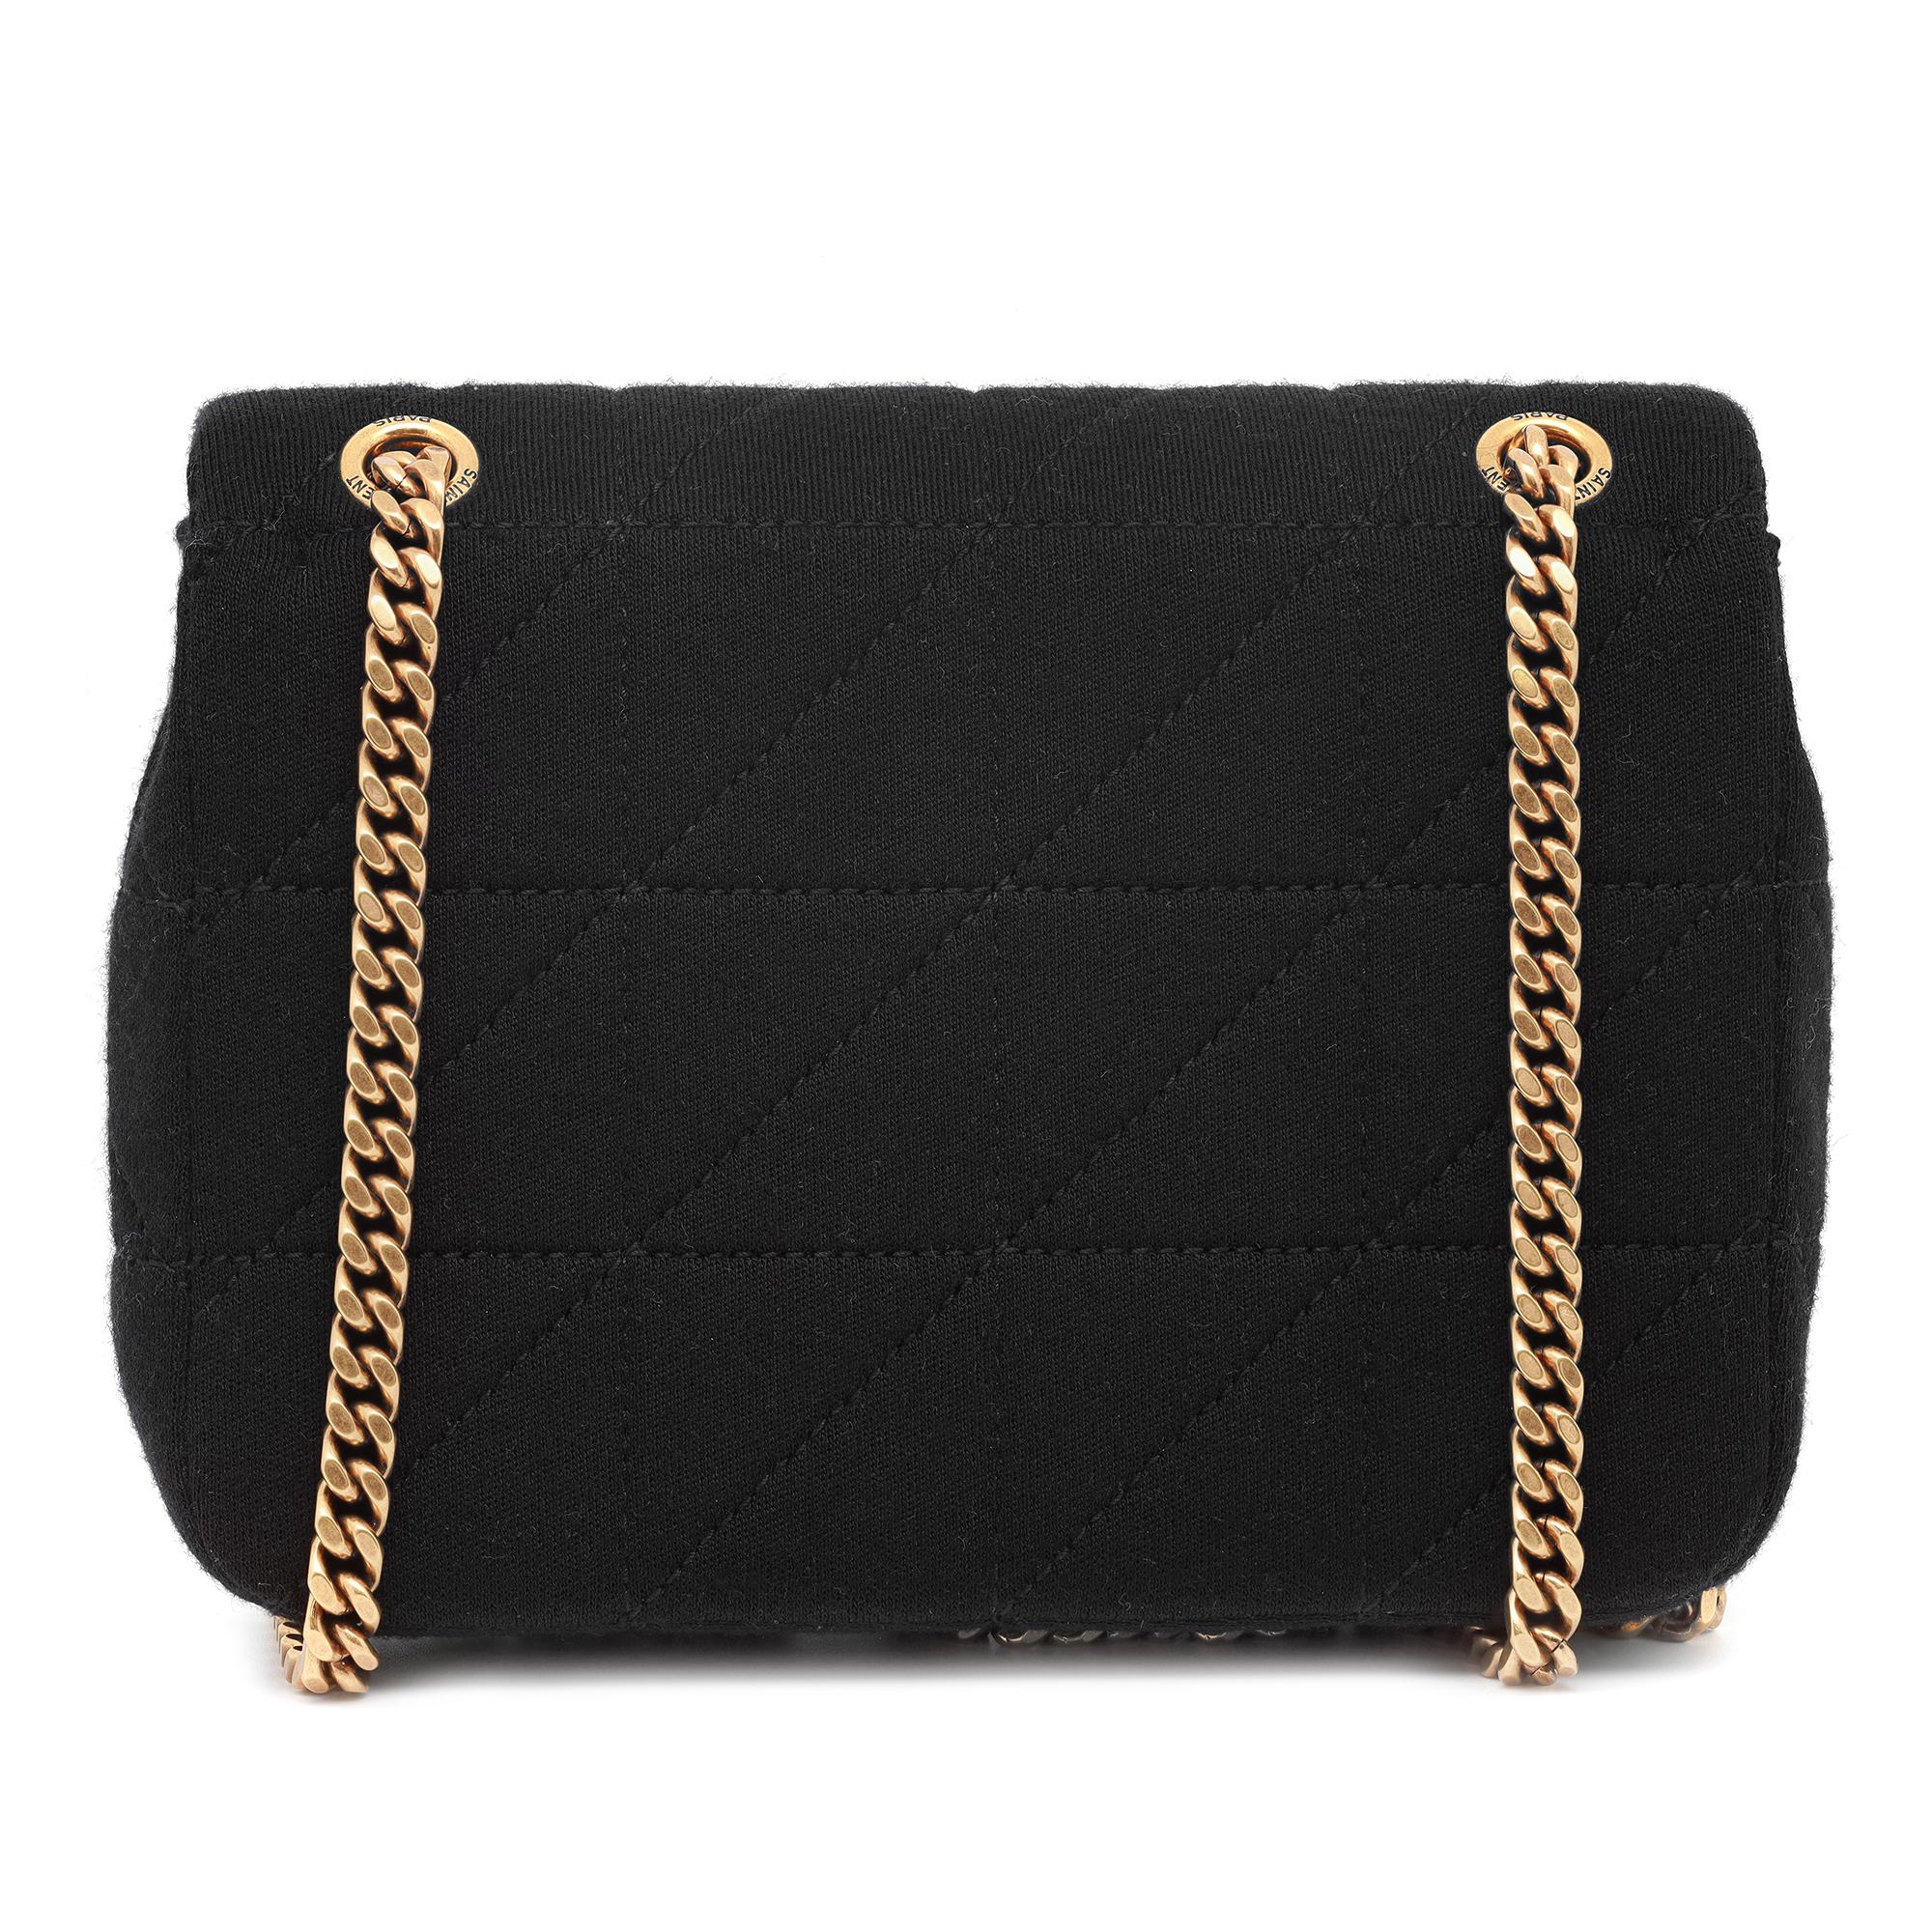 Saint Laurent Jamie crossbody mini bag in quilted wool. Color: Black. Sliding adjustable chain crossbody strap, can be doubled. Flap top with YSL logo hardware. One main interior compartment with one slip pocket. Aged gold tone hardware.